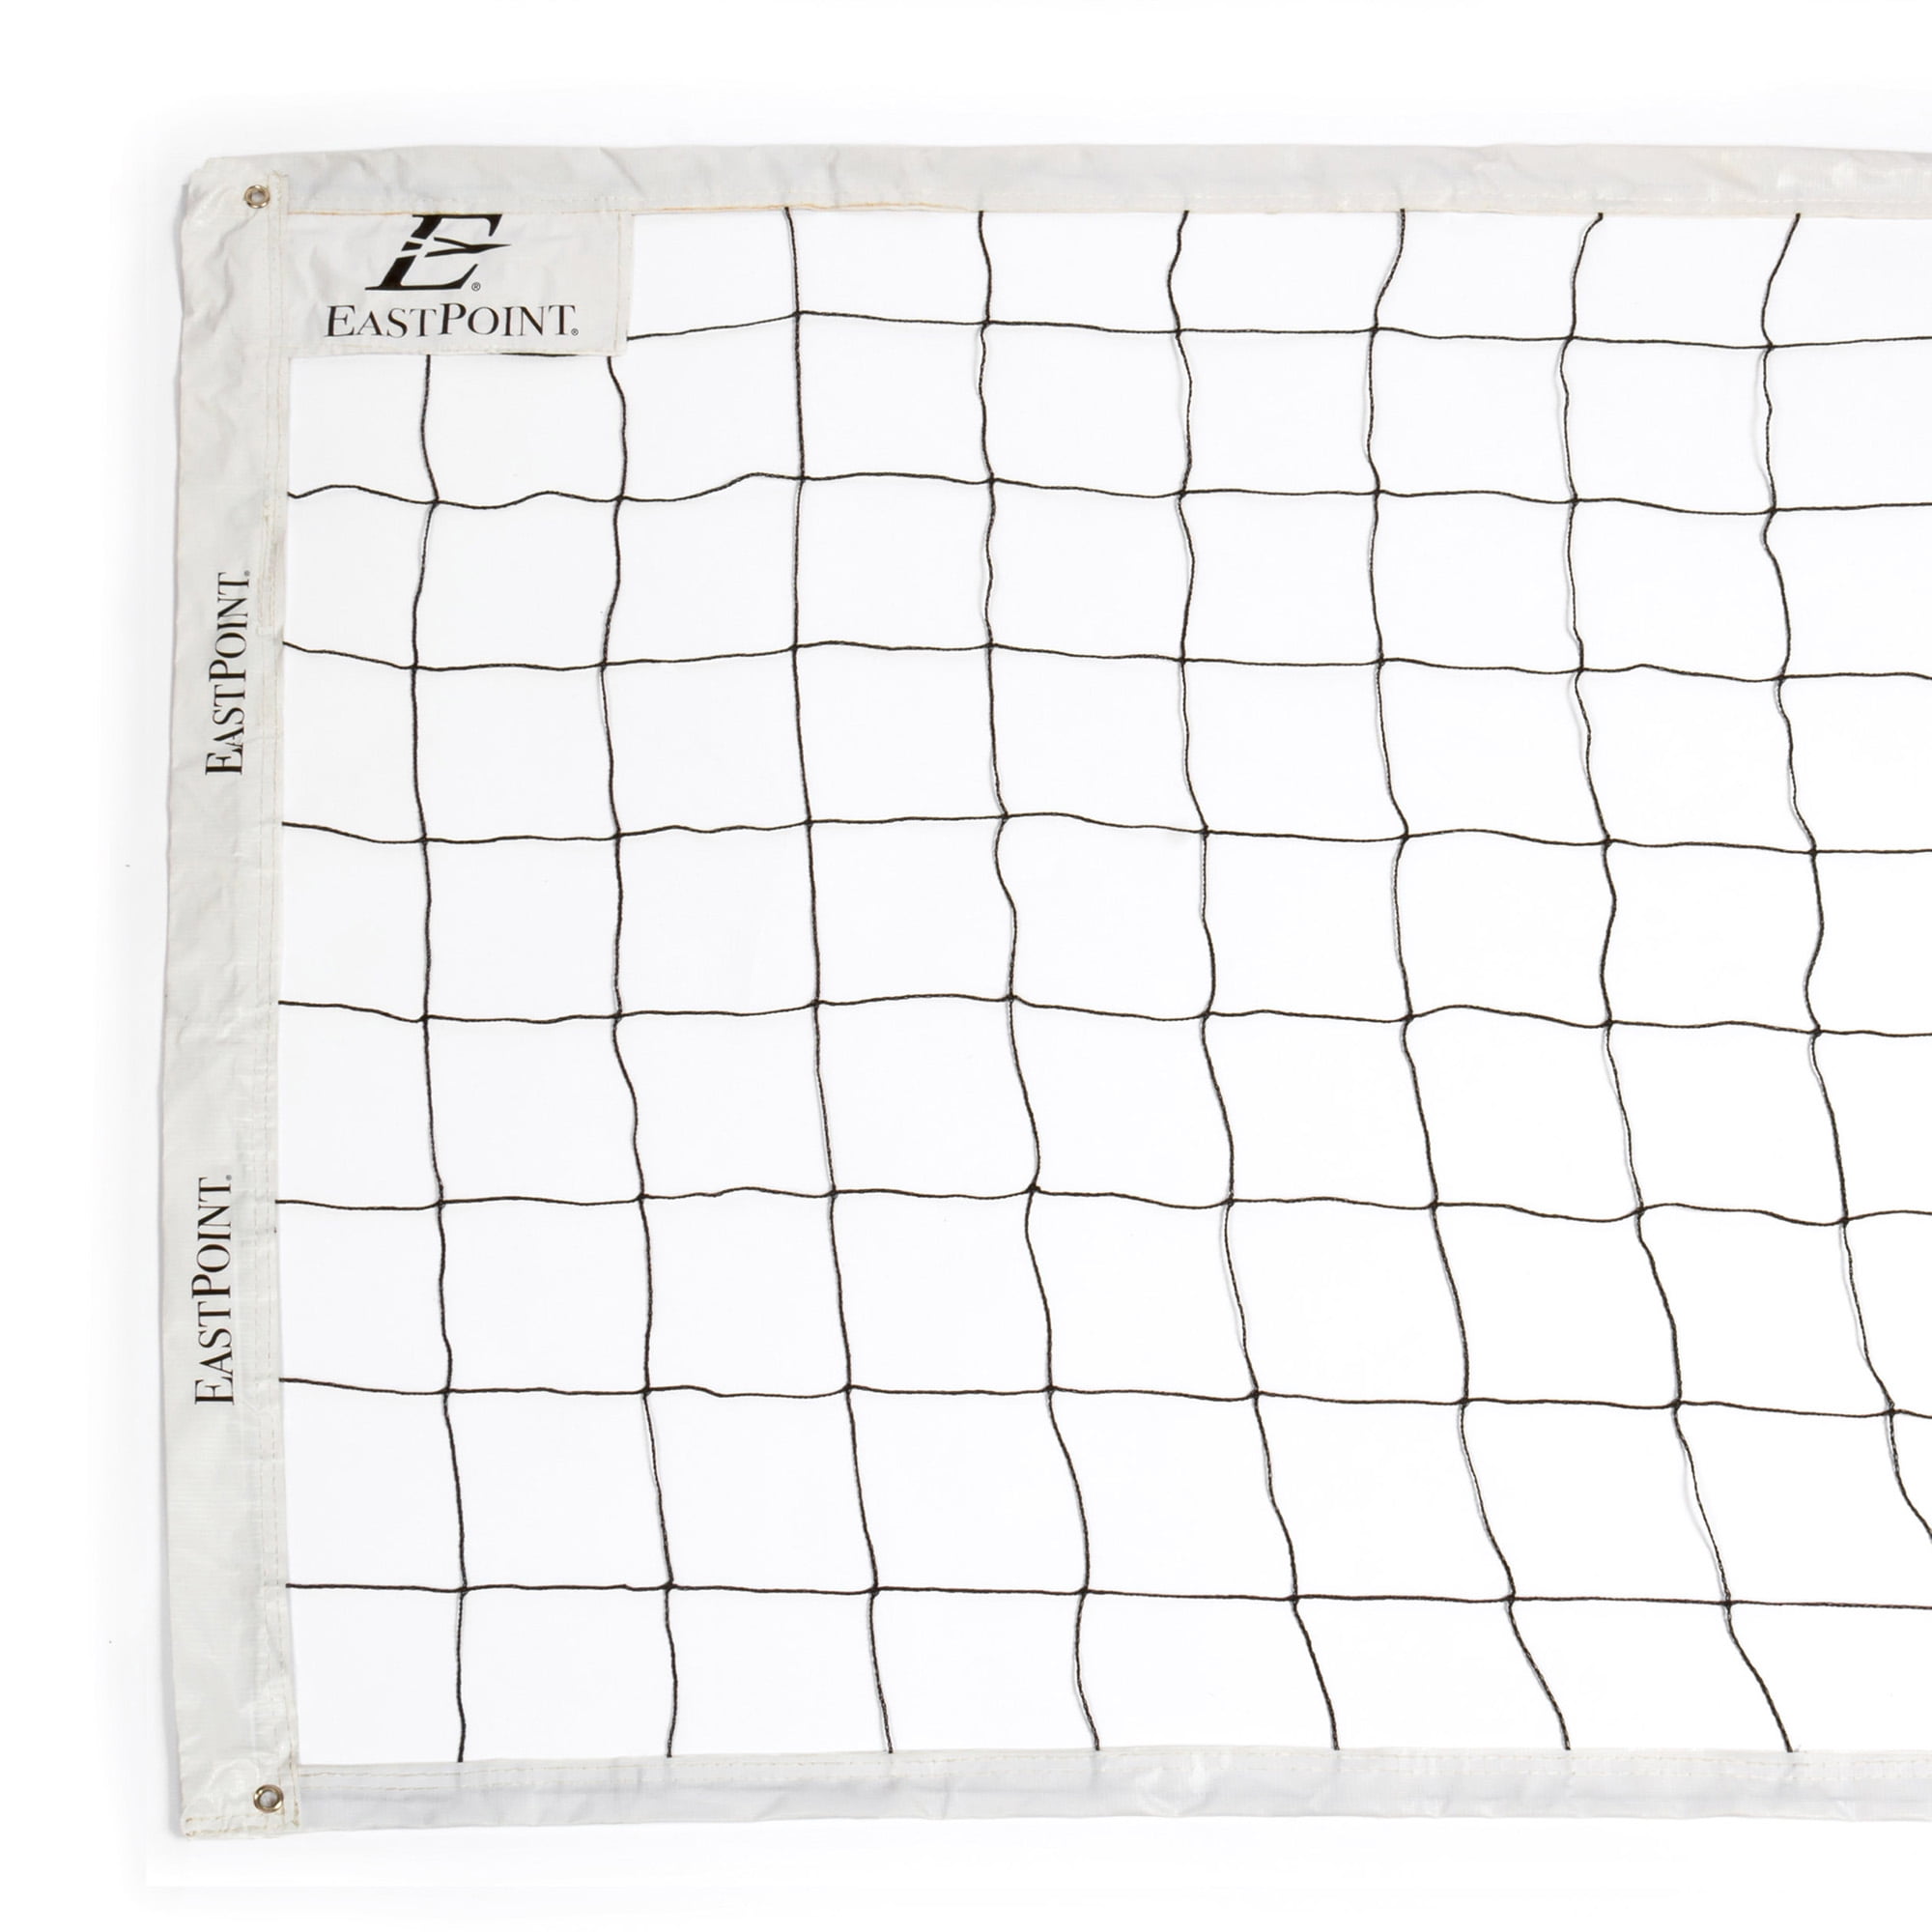 L H 32 ft. x 3 ft. EastPoint Sports Volleyball Net for Outdoor Play 